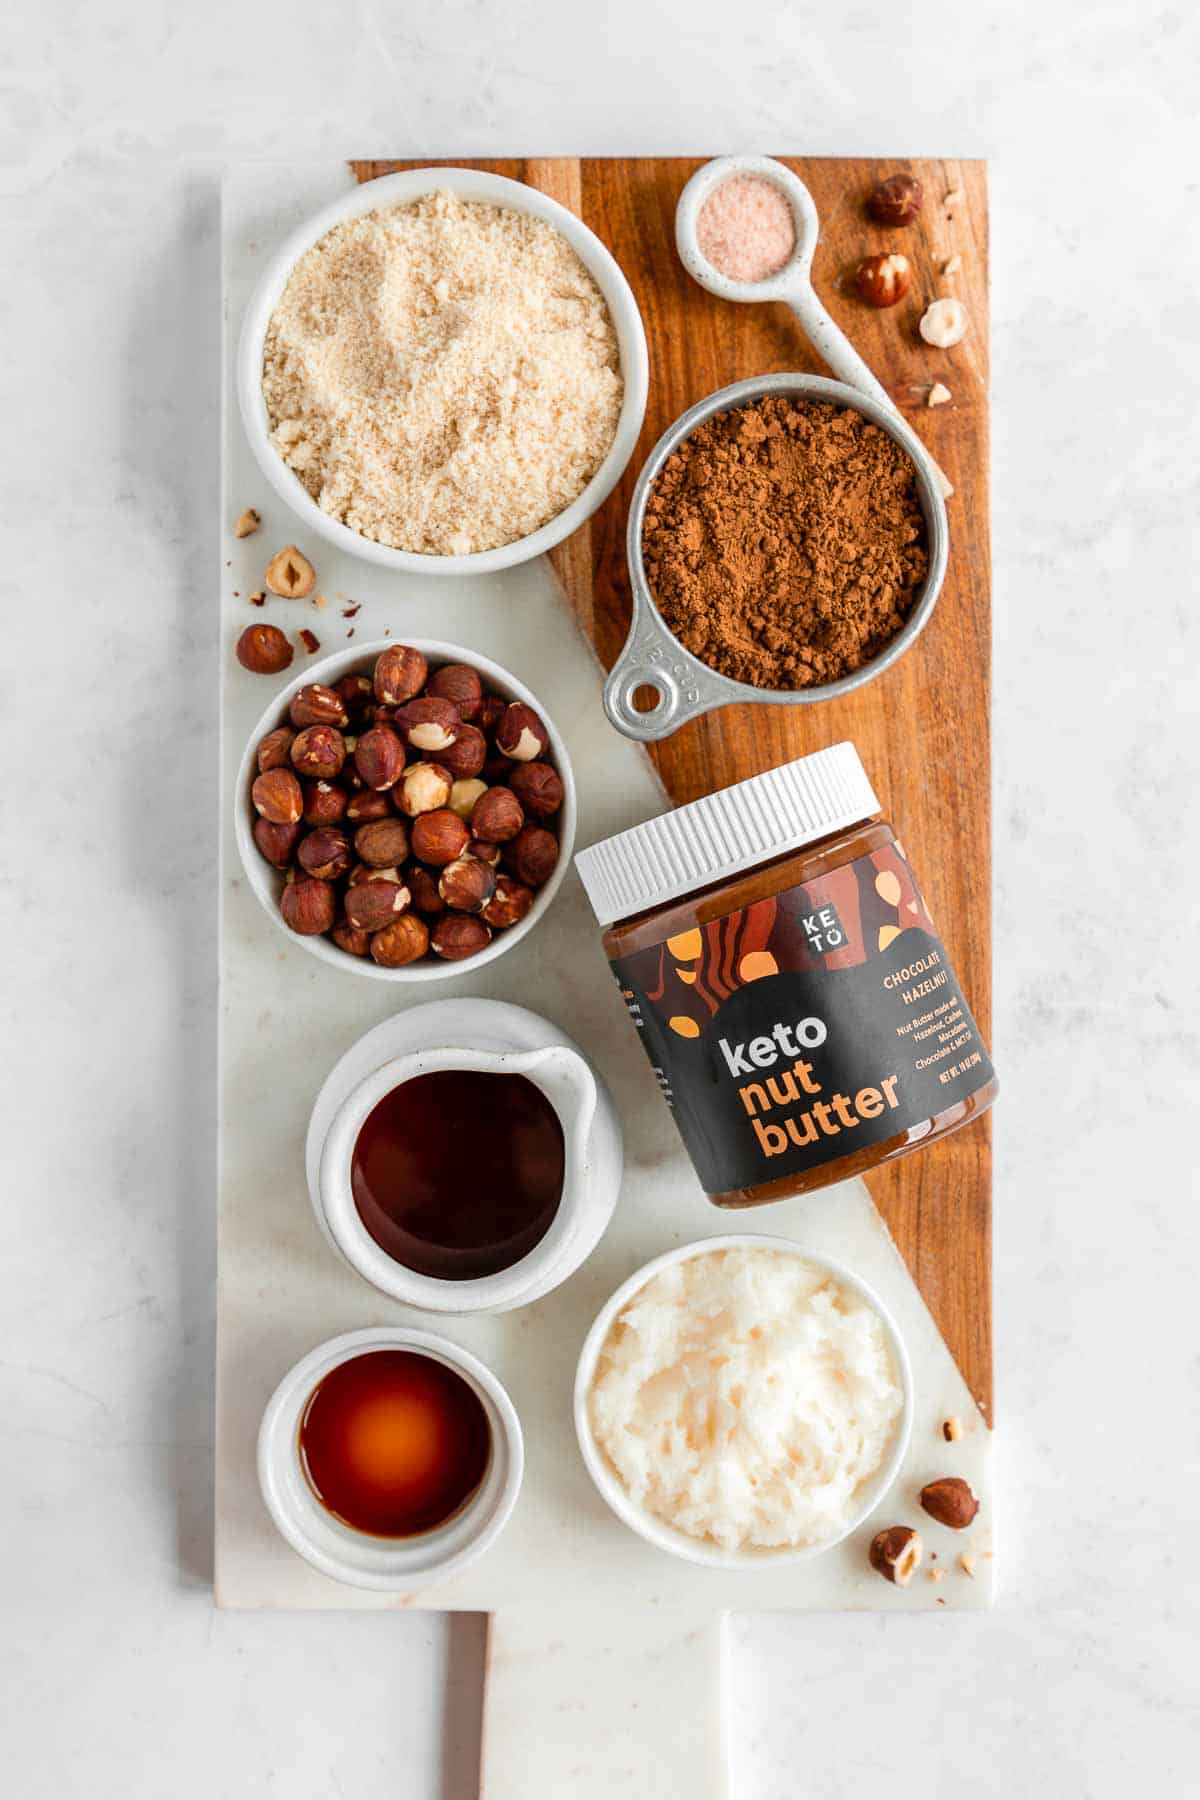 a marble and wood serving board topped with bowls of almond flour, perfect keto hazelnut butter, cacao powder, maple syrup, and hazelnuts